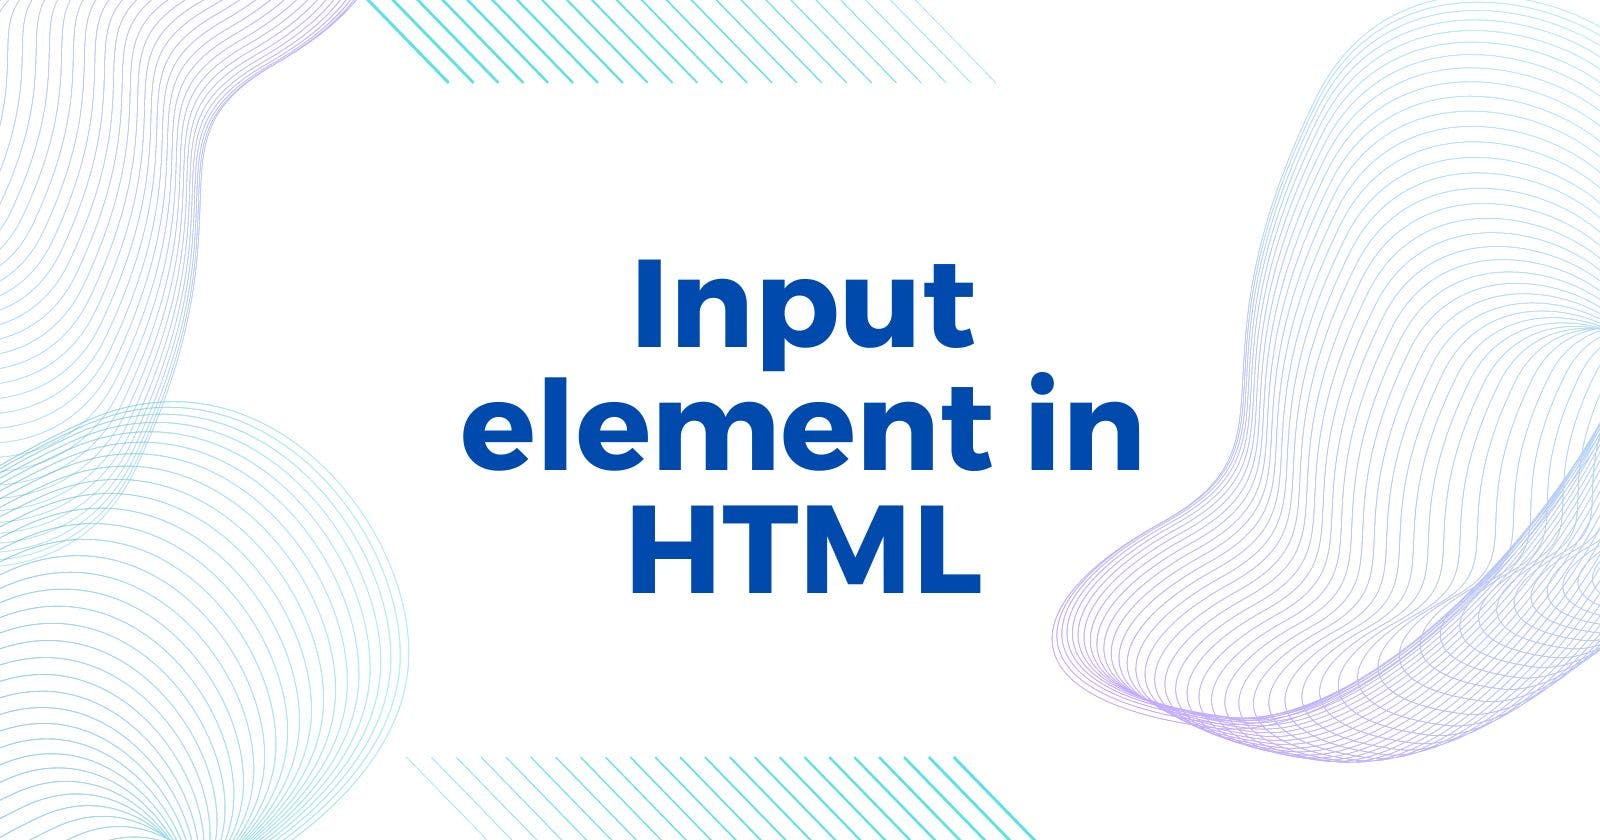 Input element in HTML